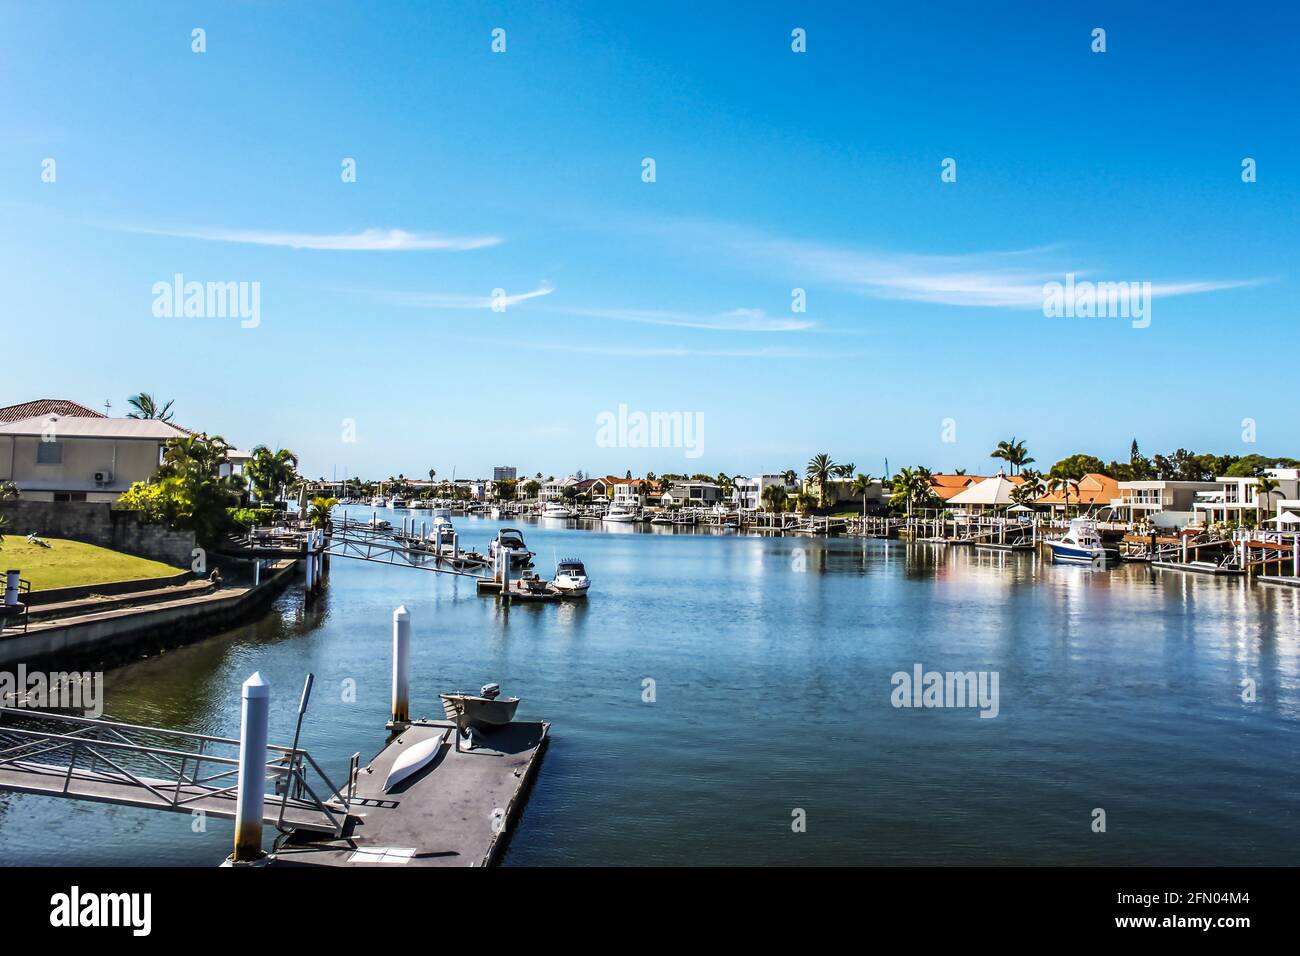 Canal in tropical setting with boat docks and moored boats by each waterside house and palm trees under blue sky Stock Photo